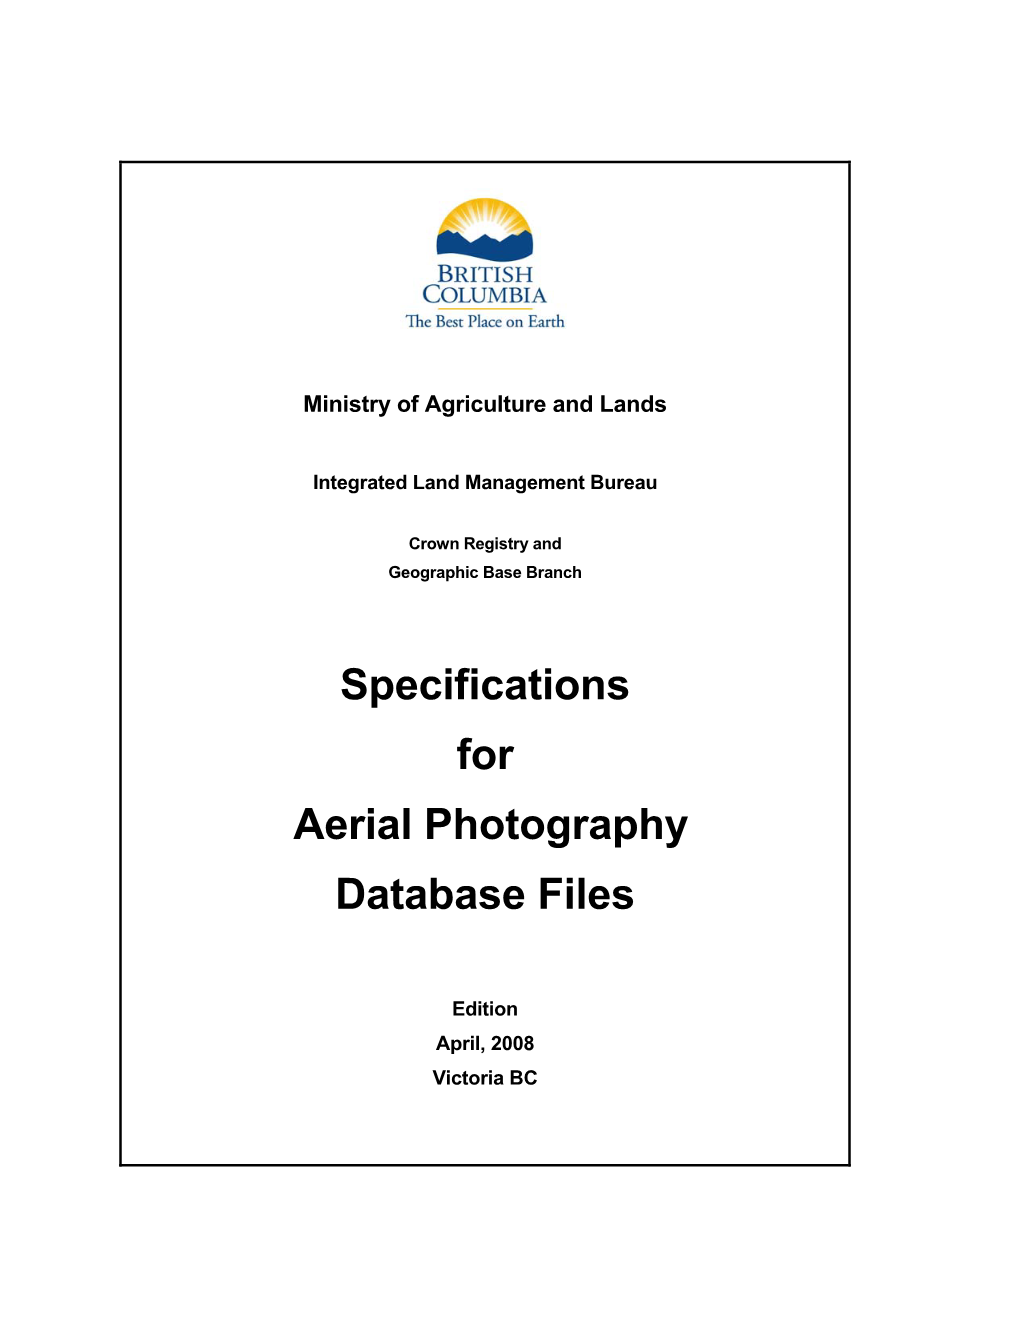 Specifications for Aerial Photography Database Files (PDF)